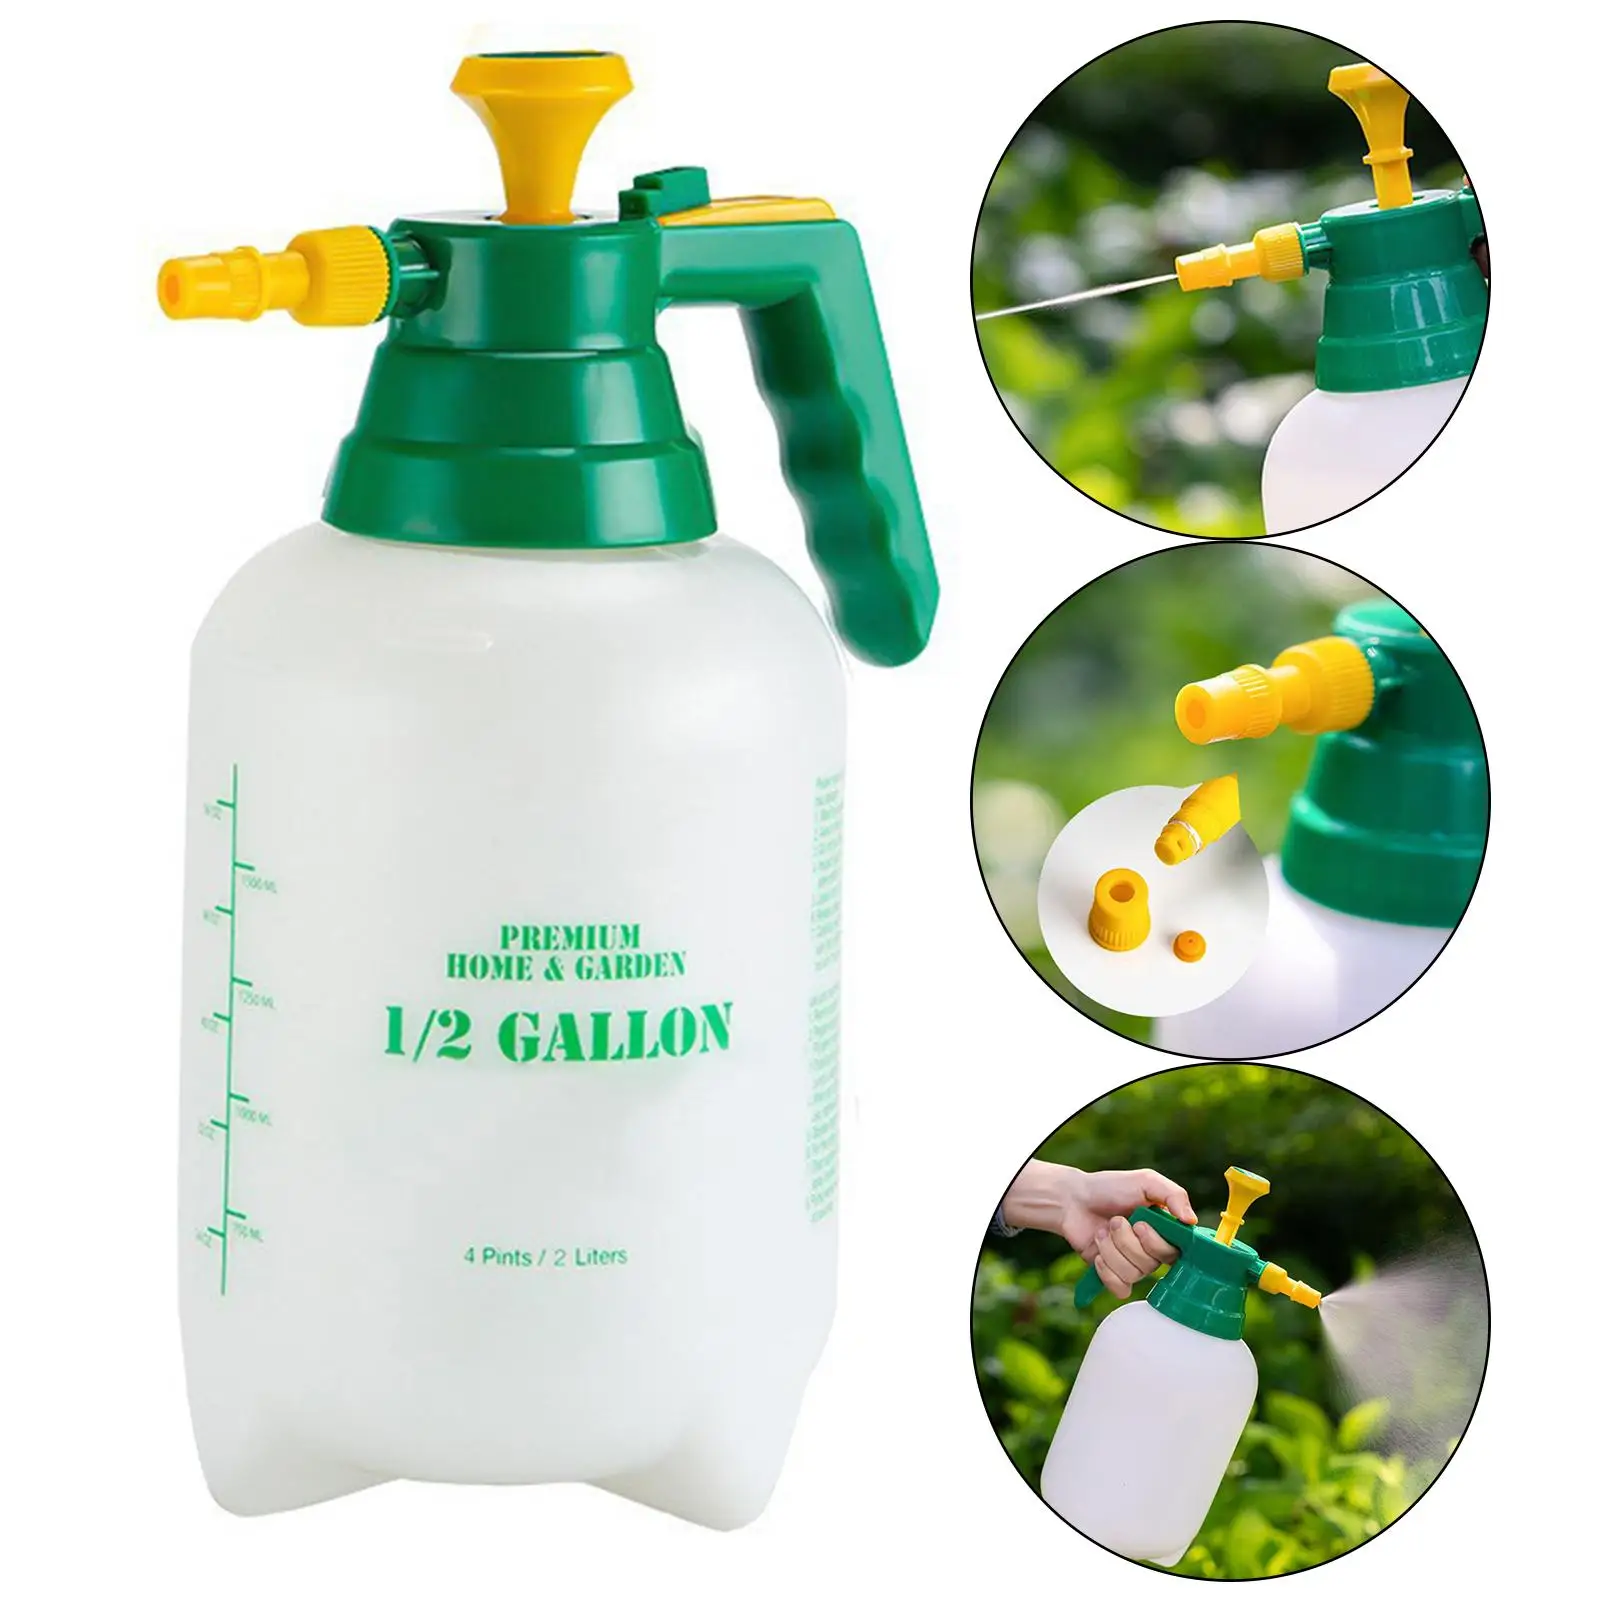 2L Manual Garden Sprayer Adjustable Brass Nozzle Hand Lawn Pressure Pump Sprayer for Outdoor Indoor Home Cleaning Lawn Watering